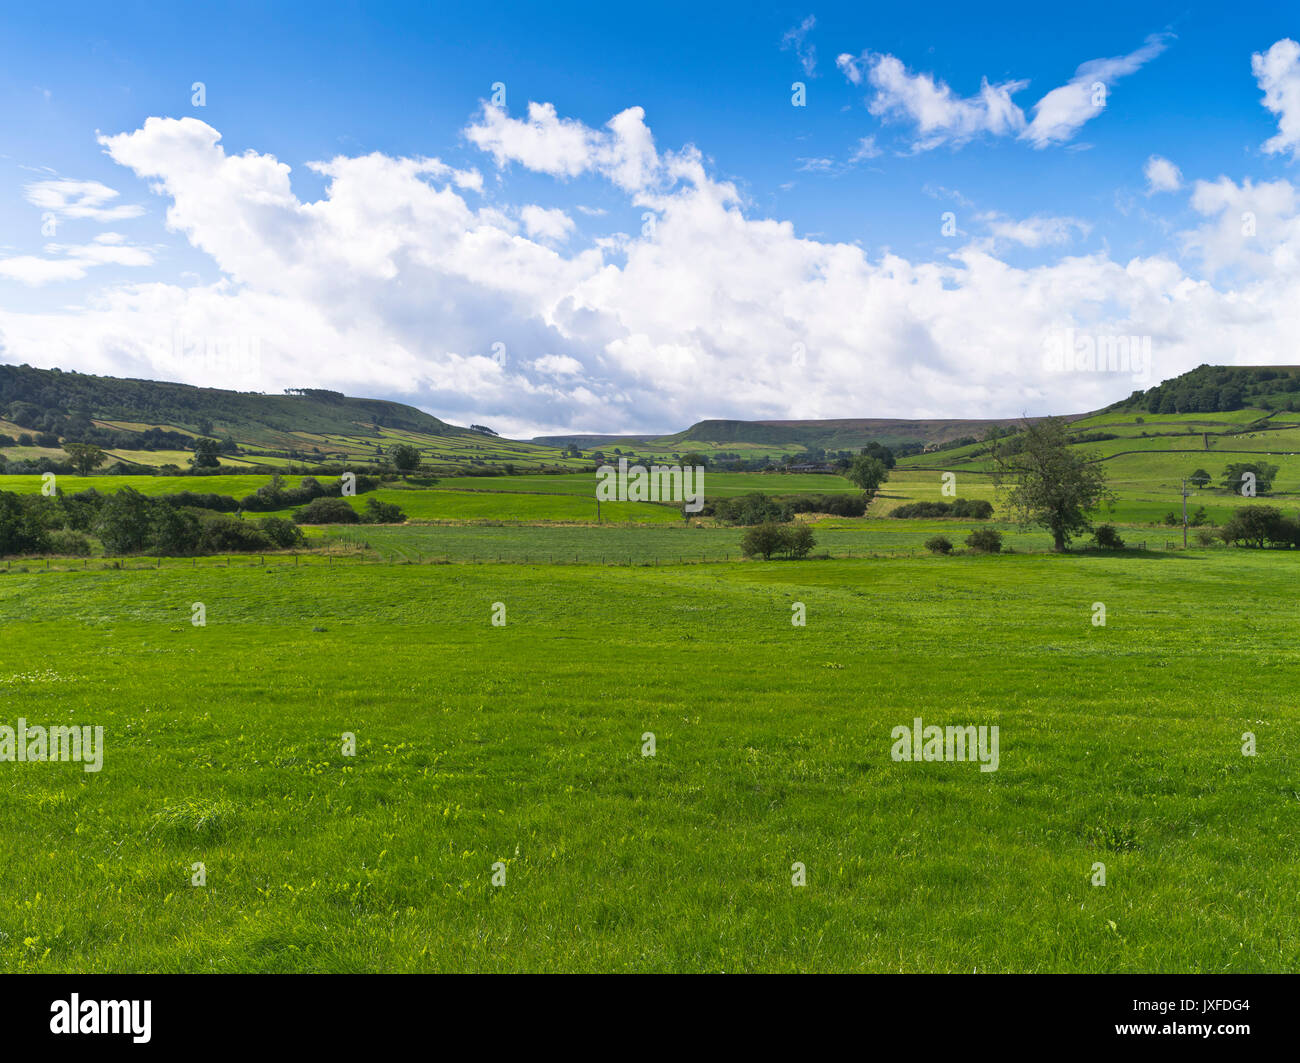 dh Esk Valley york national park DANBY NORTH YORKSHIRE Fields valley view of Danby Moor beautiful landscape moors countryside Stock Photo